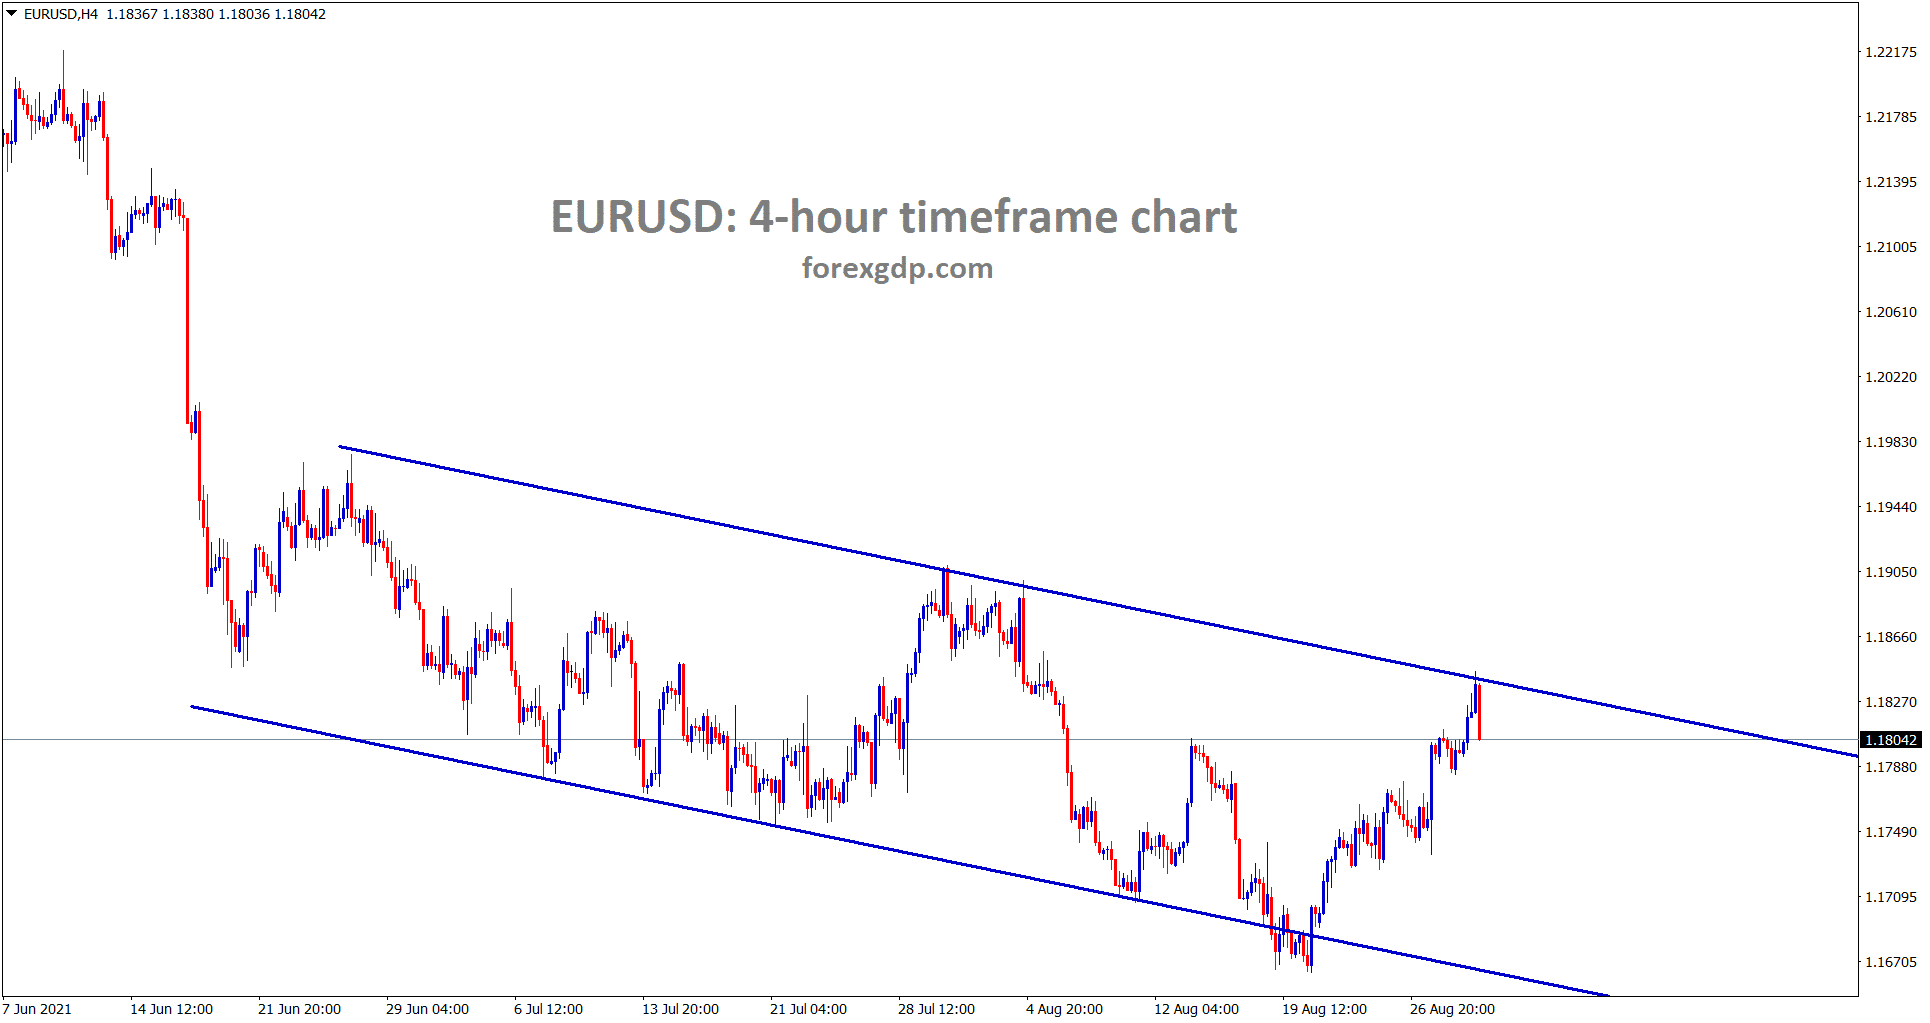 EURUSD is falling from the lower high level of the descending channel